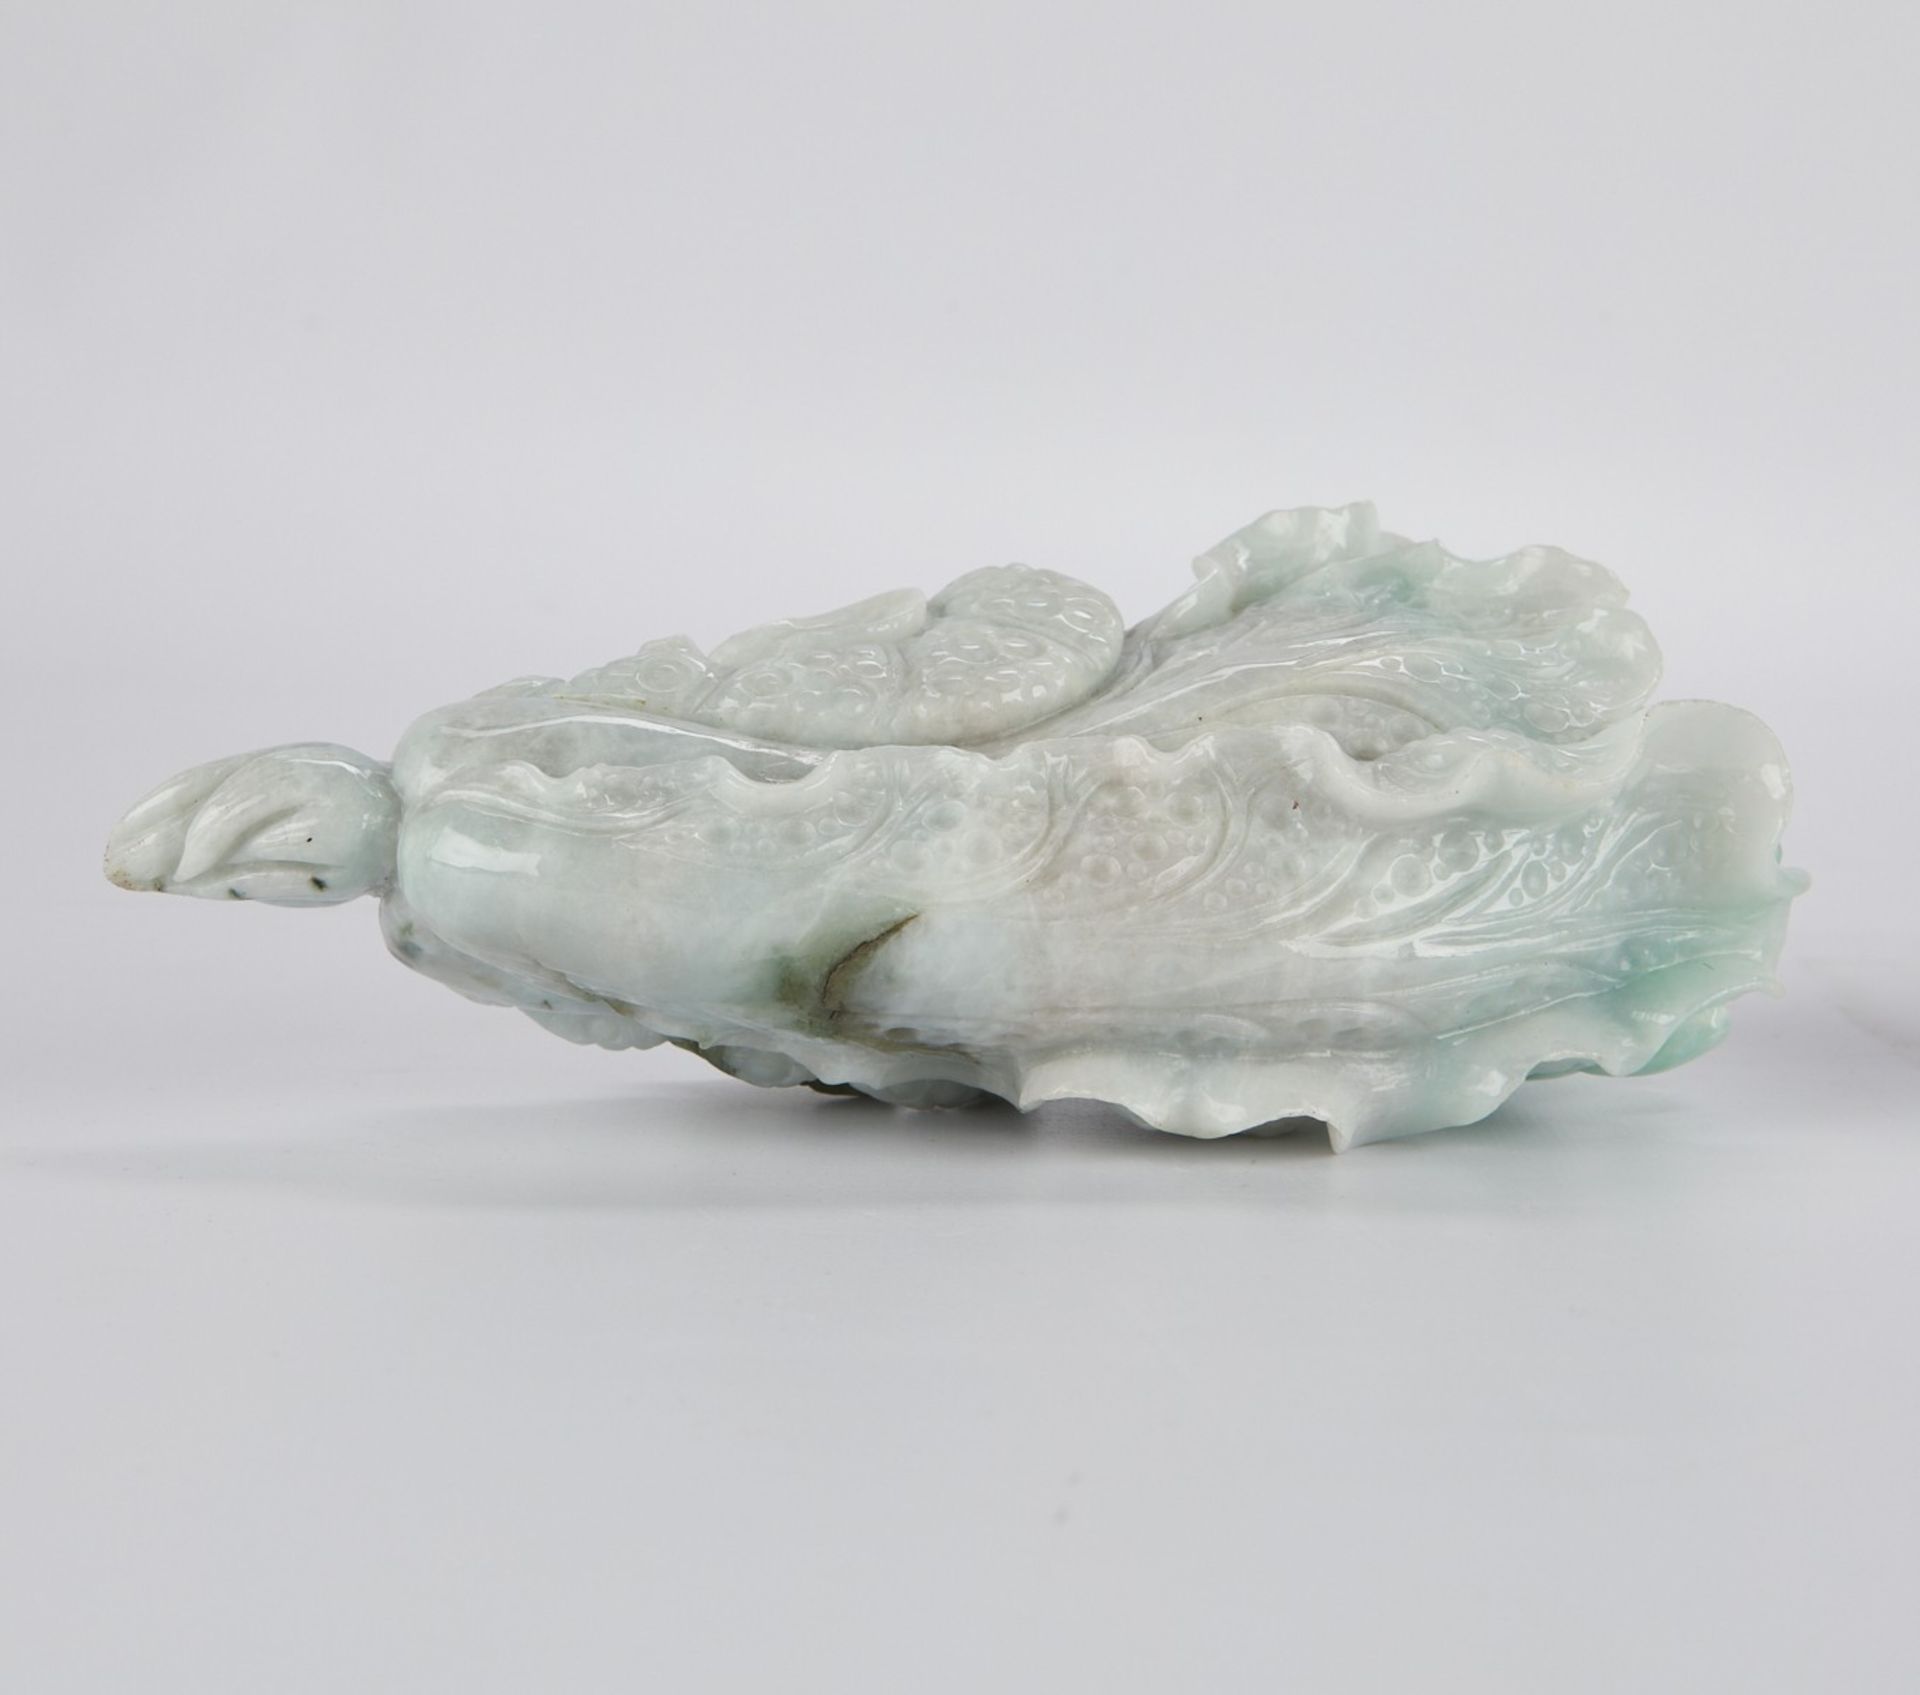 2 Fine Chinese Carved Jade Cabbages - Image 9 of 11